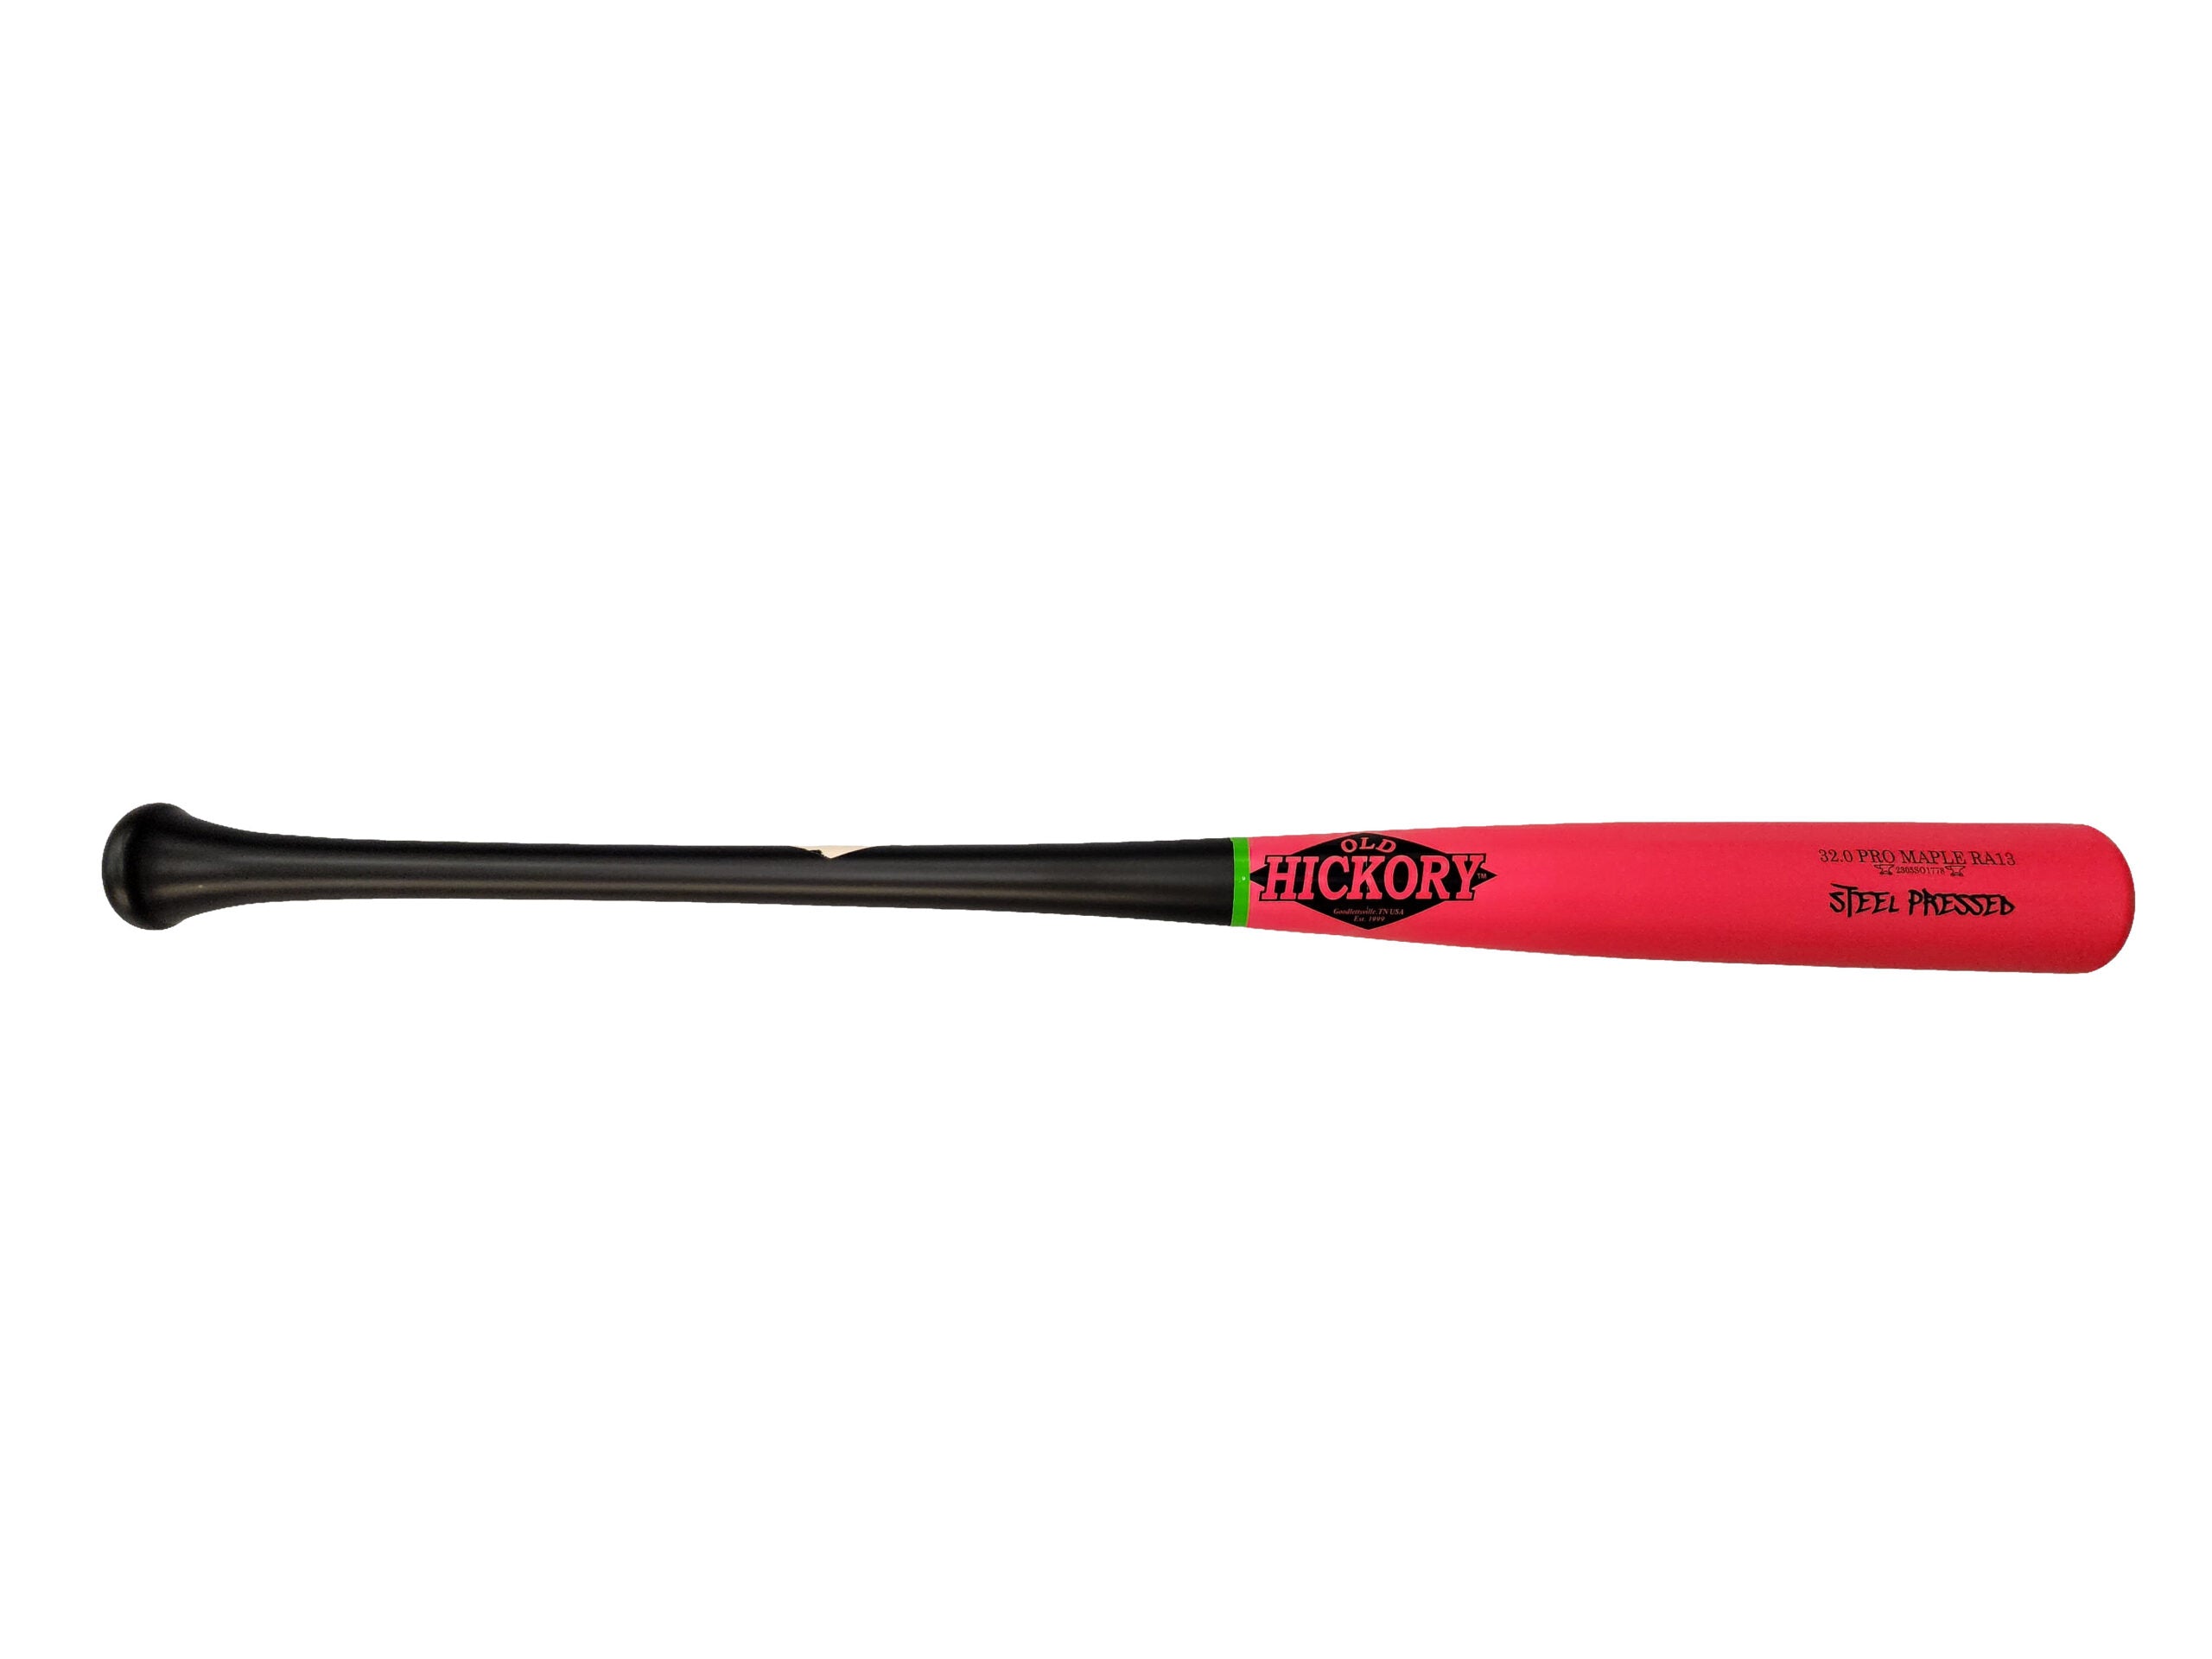 Old Hickory RA13 Watermelon Steel Pressed